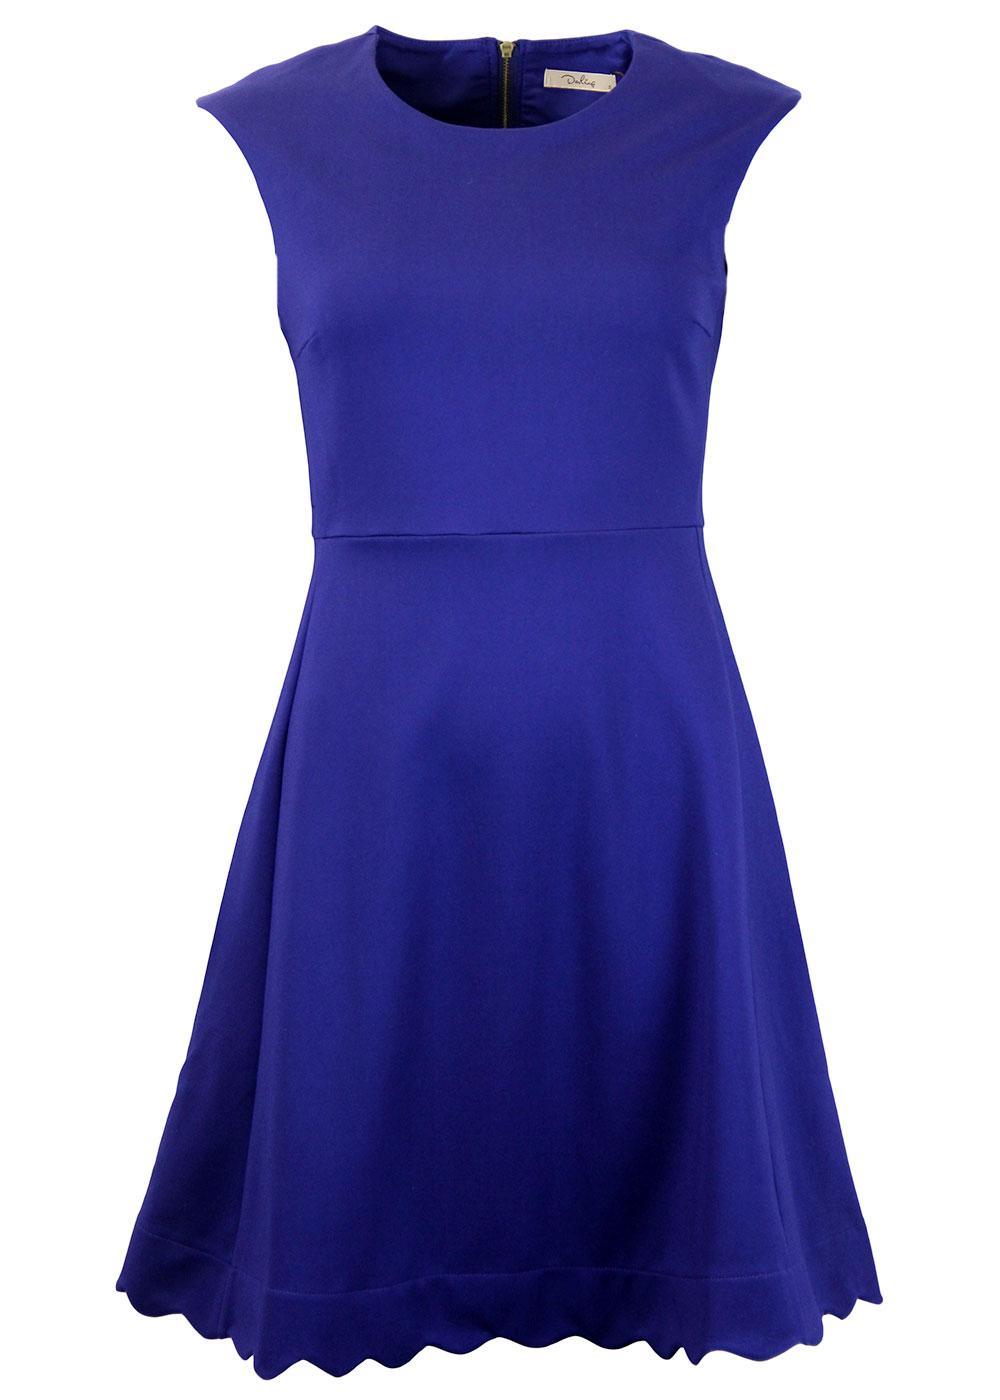 DARLING Claire Retro 1960s Mod Scalloped Hem Day Dress in Navy